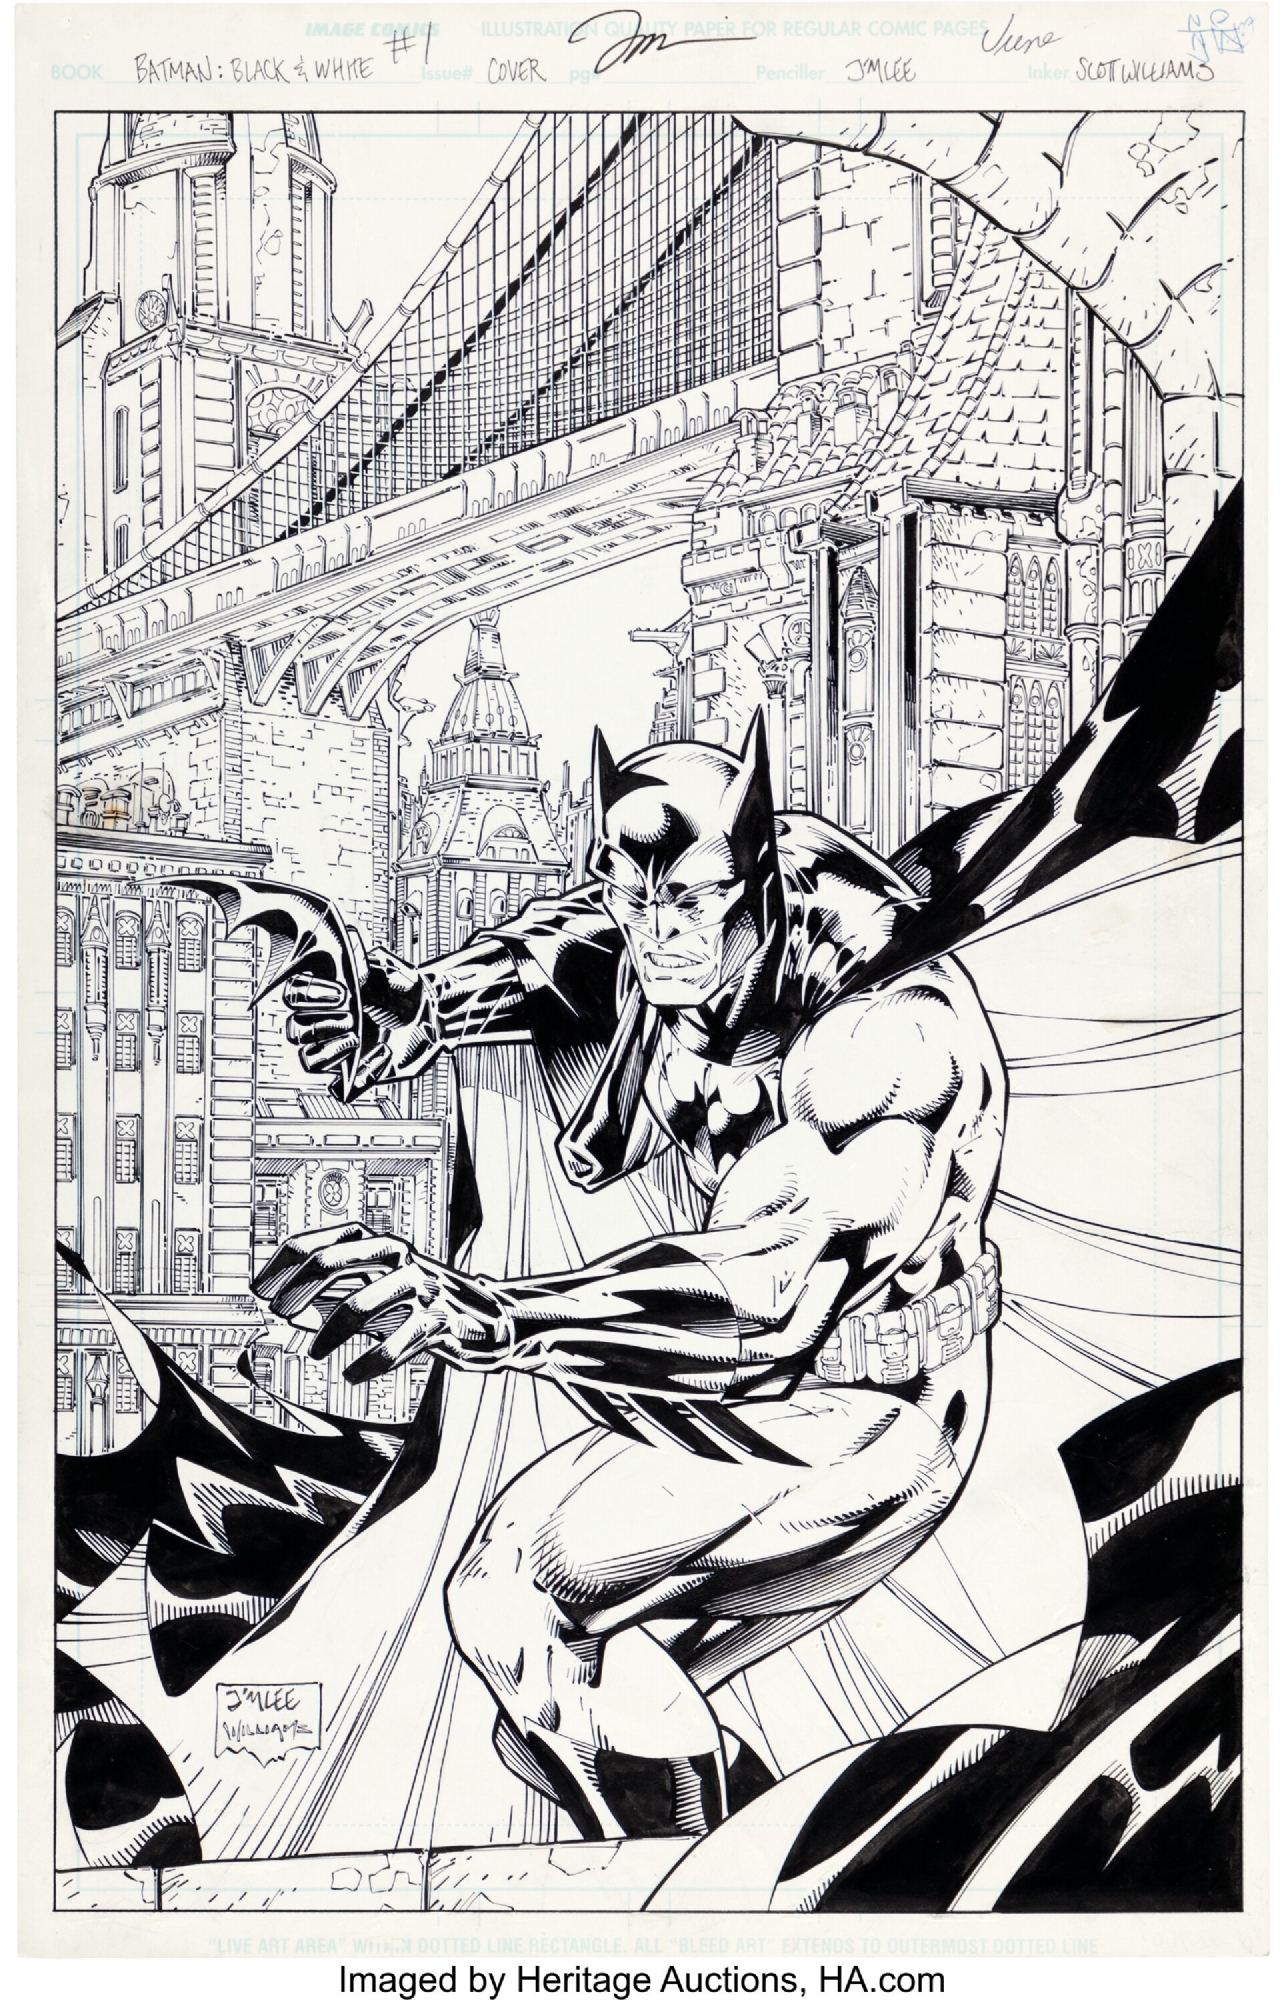 Batman: Black and White #1 (DC, 1996), in Heritage Auctions Previews's 7270  Signature Comic Art Auction April 7 - 10, 2022 Comic Art Gallery Room